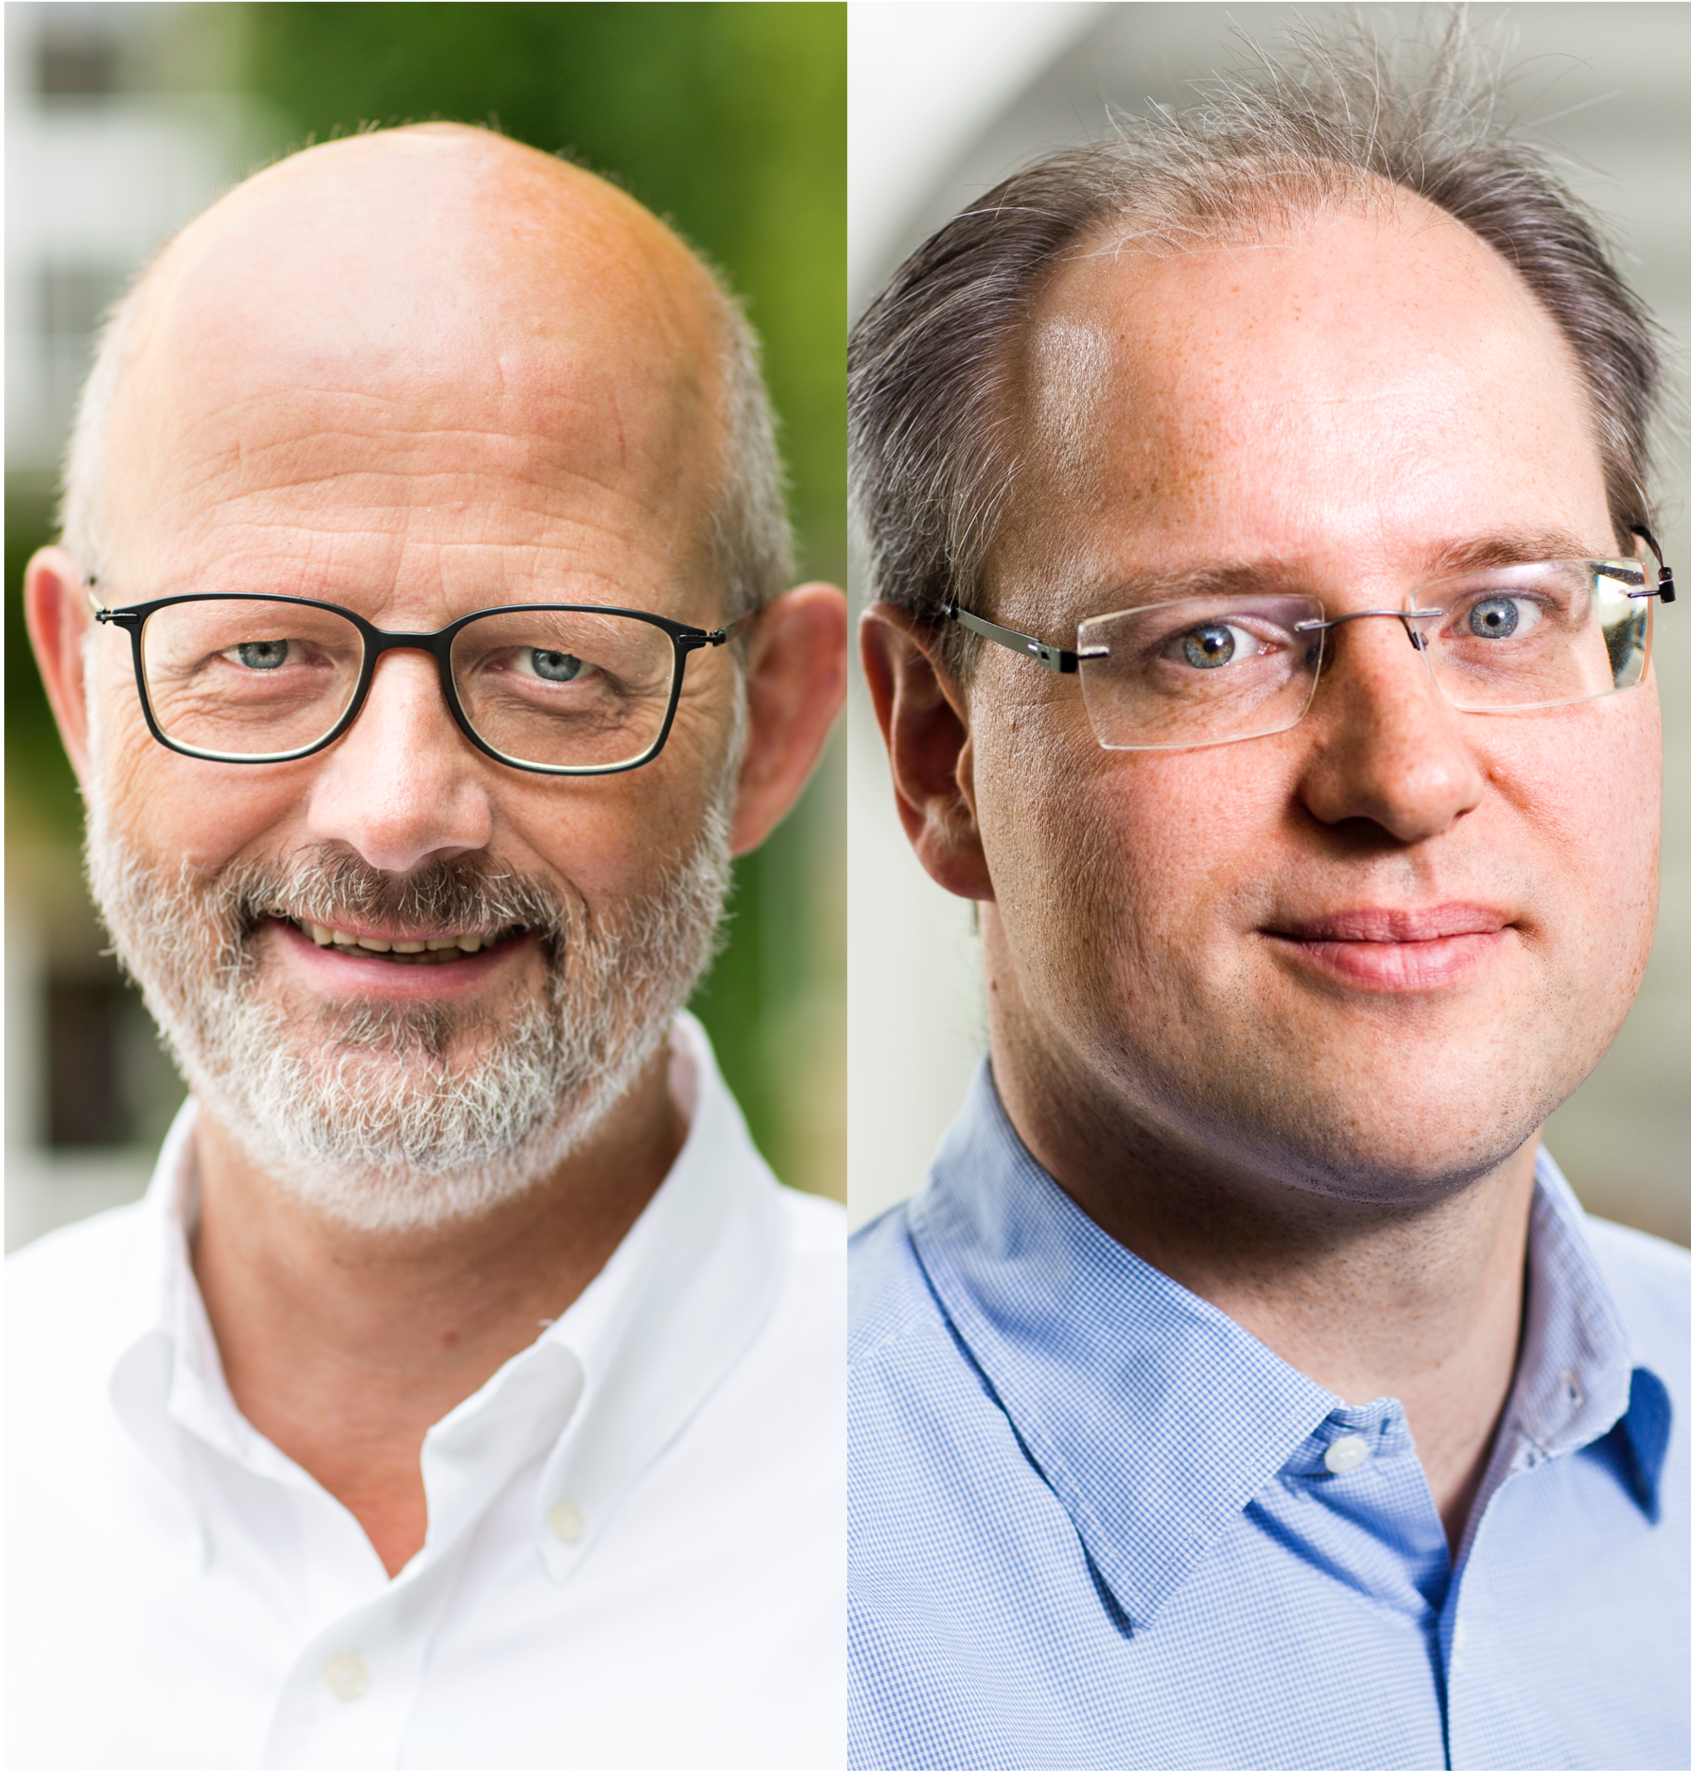 Niels Christian Nielsen and Henrik Birkedal each receive a Villum Synergy grant for data-driven projects. (Photos: Lars Kruse and Lise Balsby, respectively)